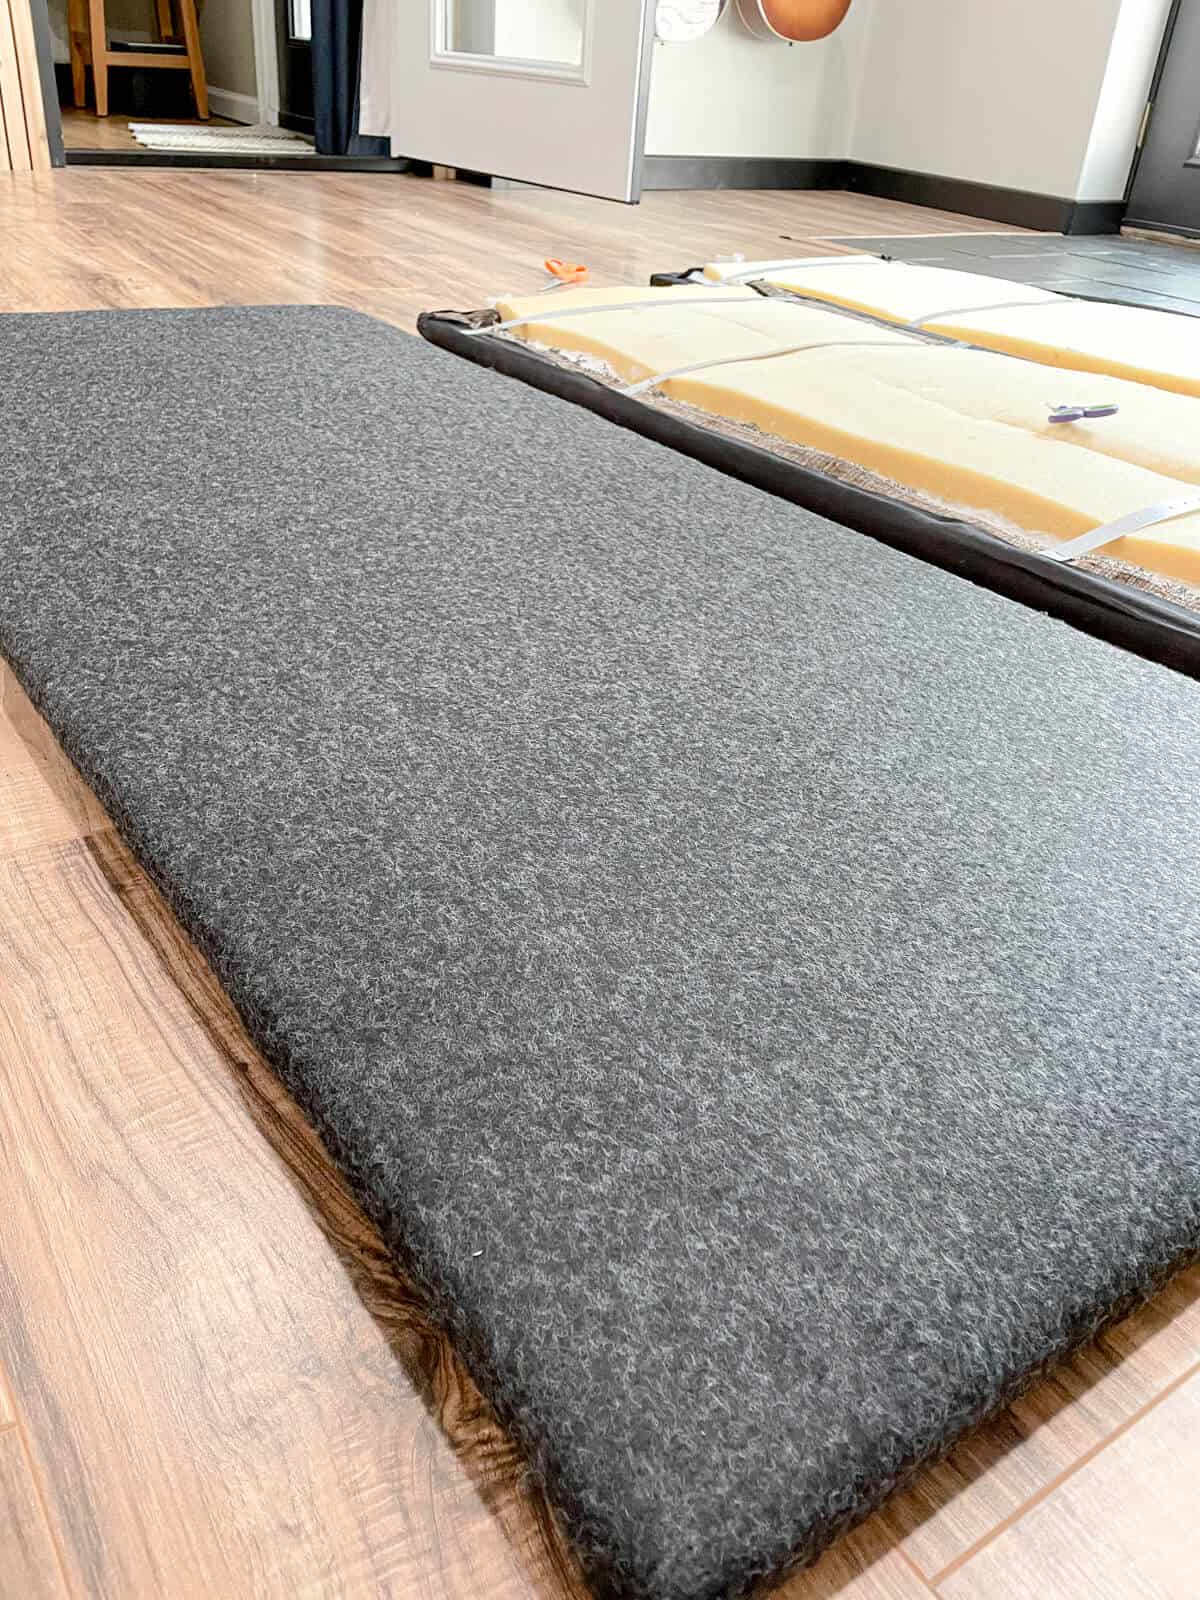 wall panels covered in charcoal felt